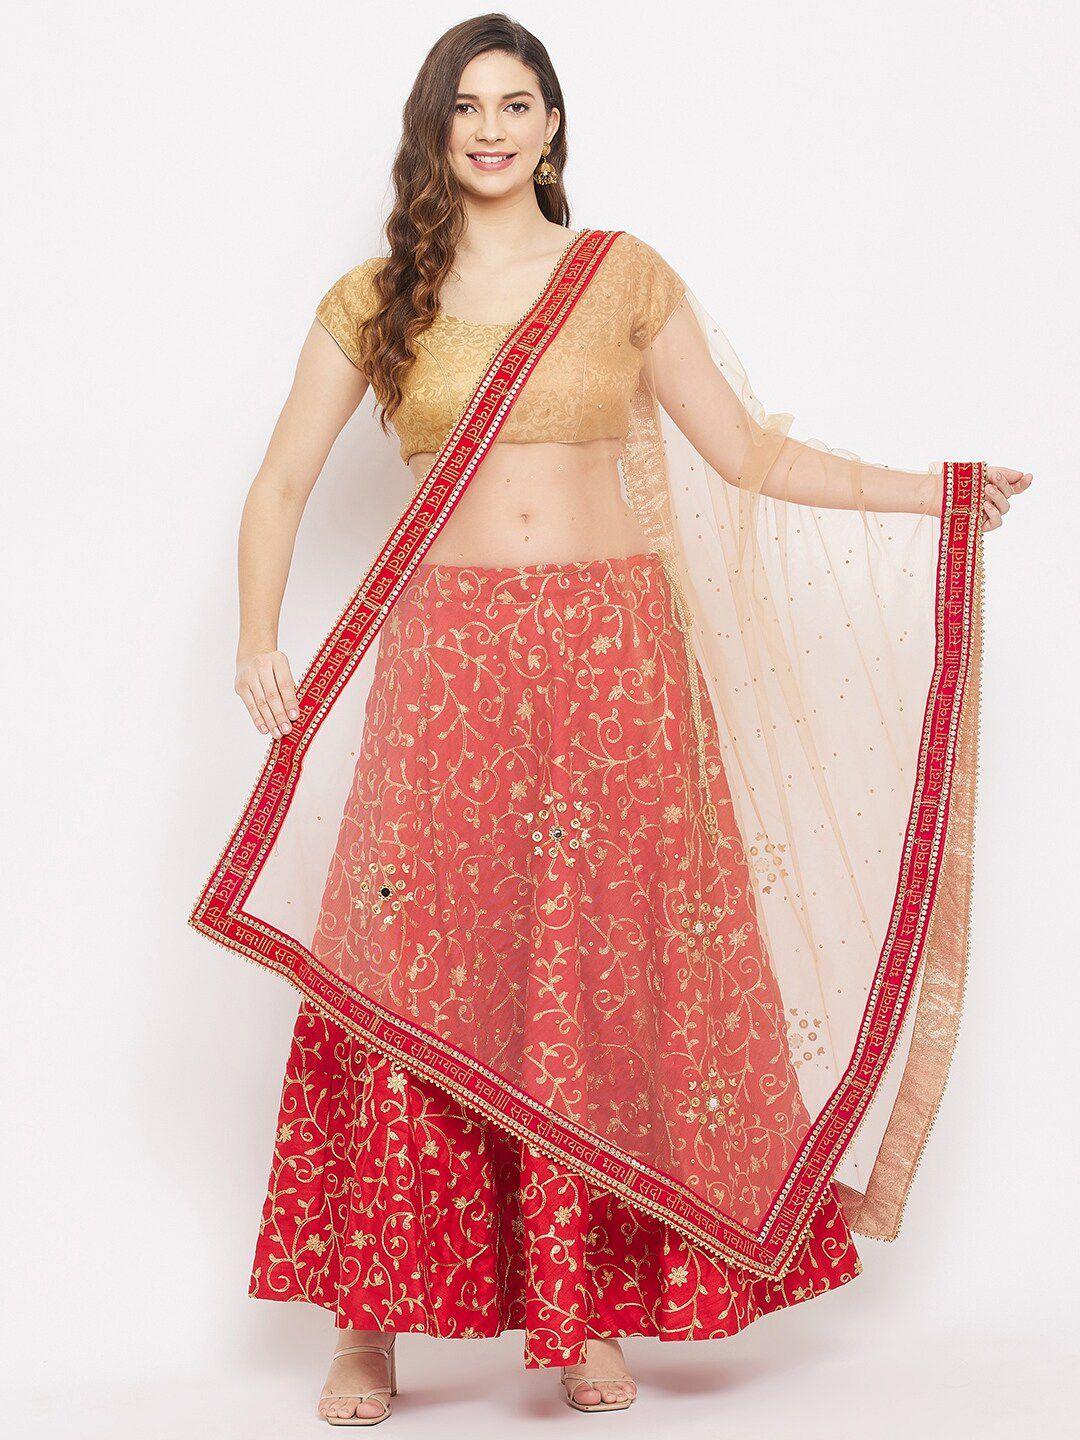 clora-creation-beige-&-red-ethnic-motifs-embroidered-dupatta-with-beads-and-stones